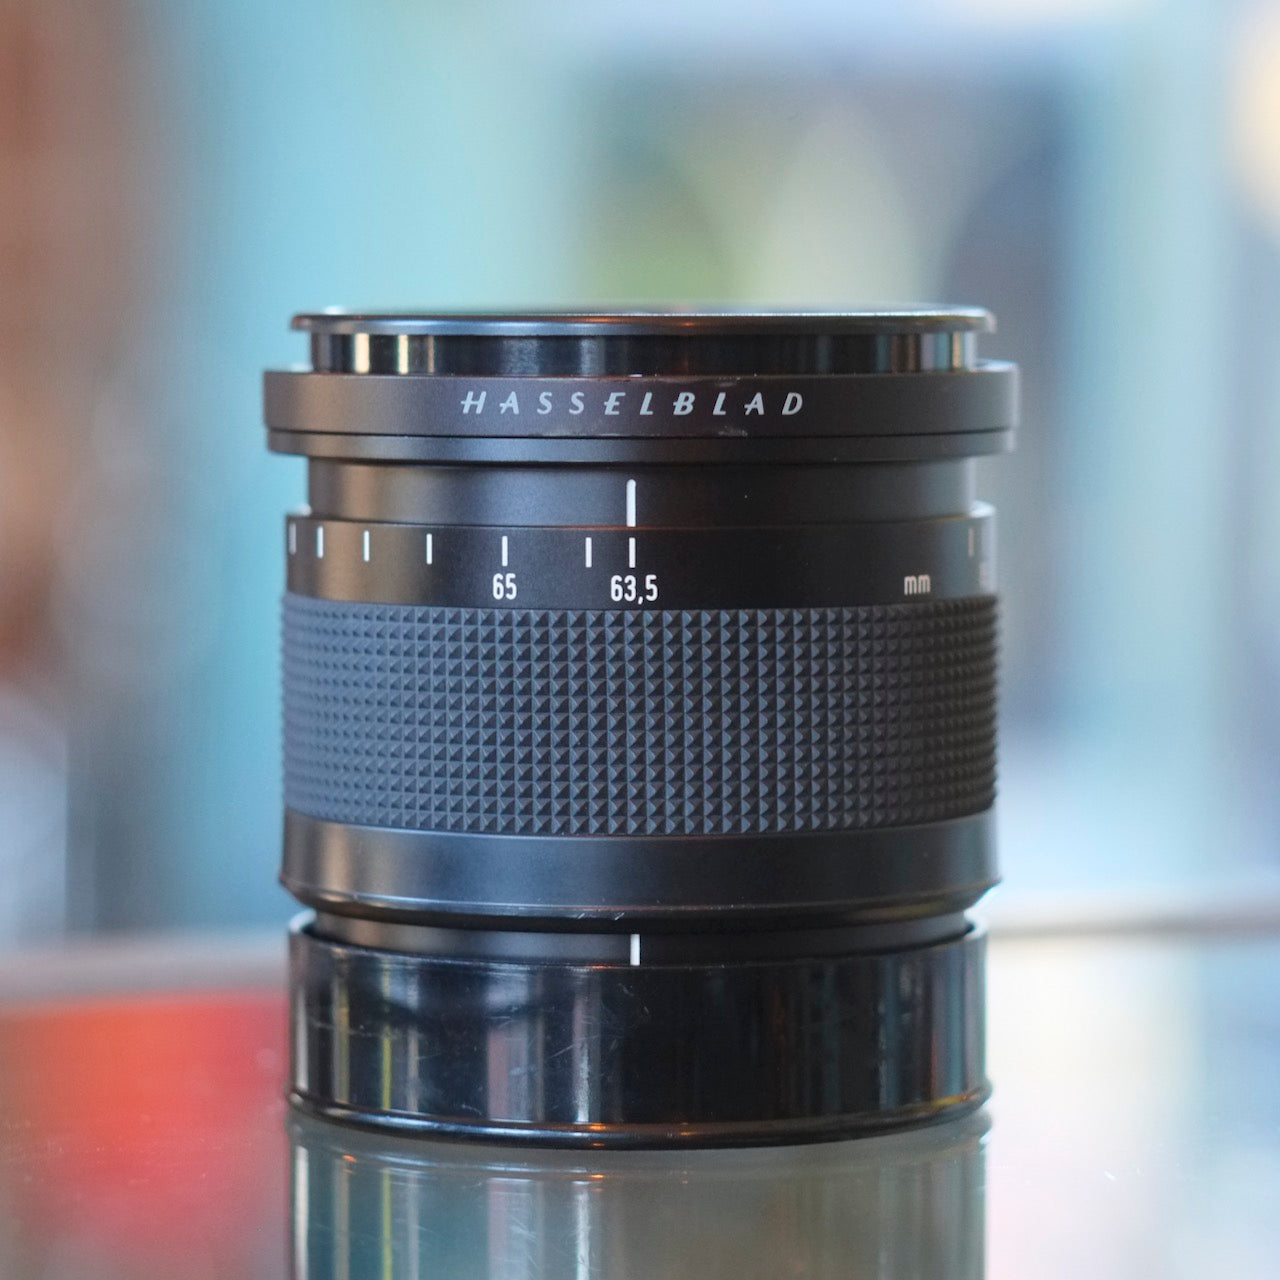 Hasselblad 63.5-85mm variable extension tube